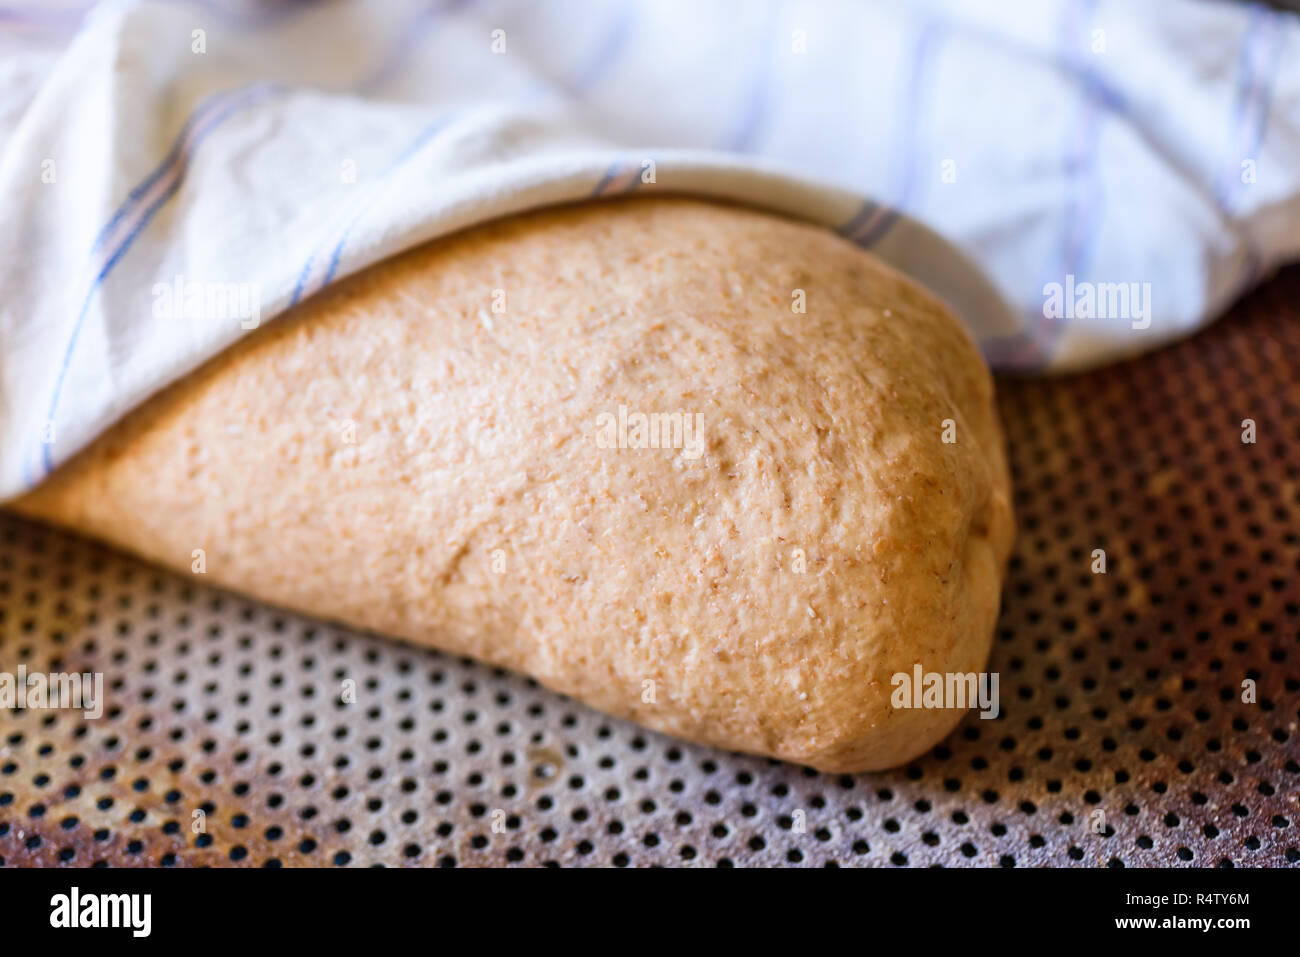 Wholemeal bread dough proofing under a kitchen towel. Stock Photo